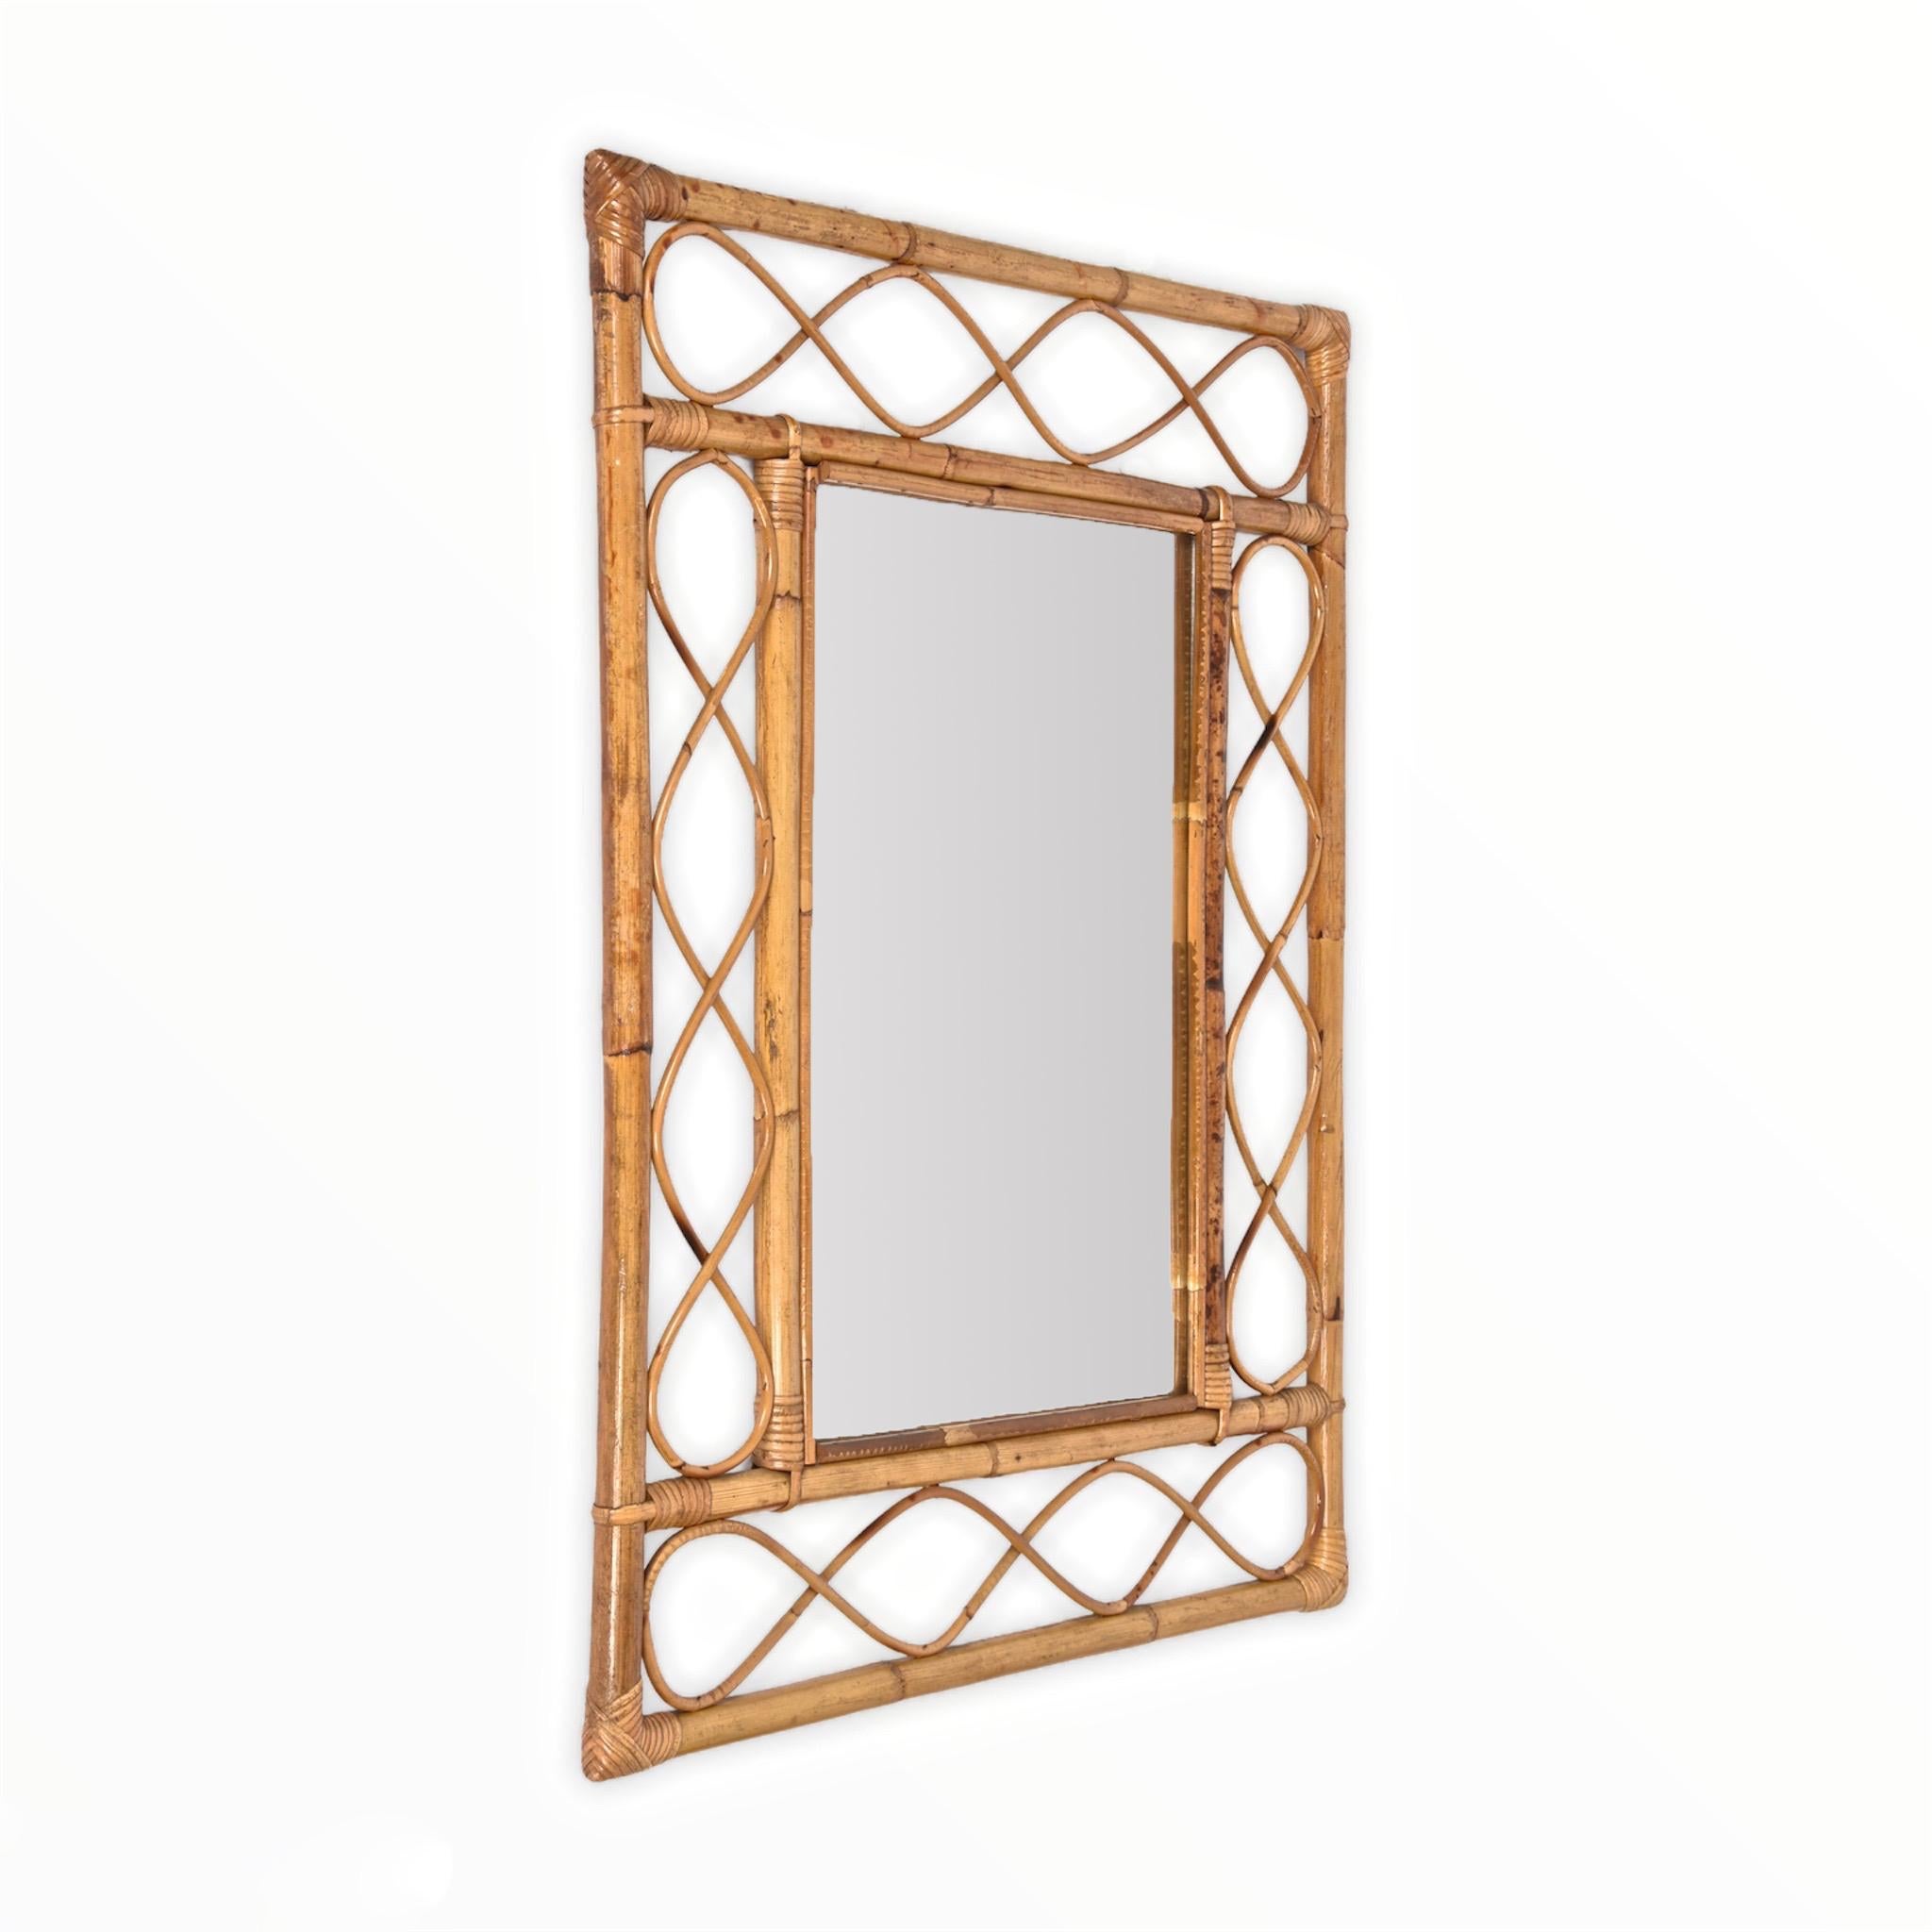 Marvellous midcentury French riviera wall mirror in bamboo and rattan. This item was produced in France in the mid-1960s.

The mirror its original and good vintage conditions, and the use of the materials and the lines, the straight bamboo and